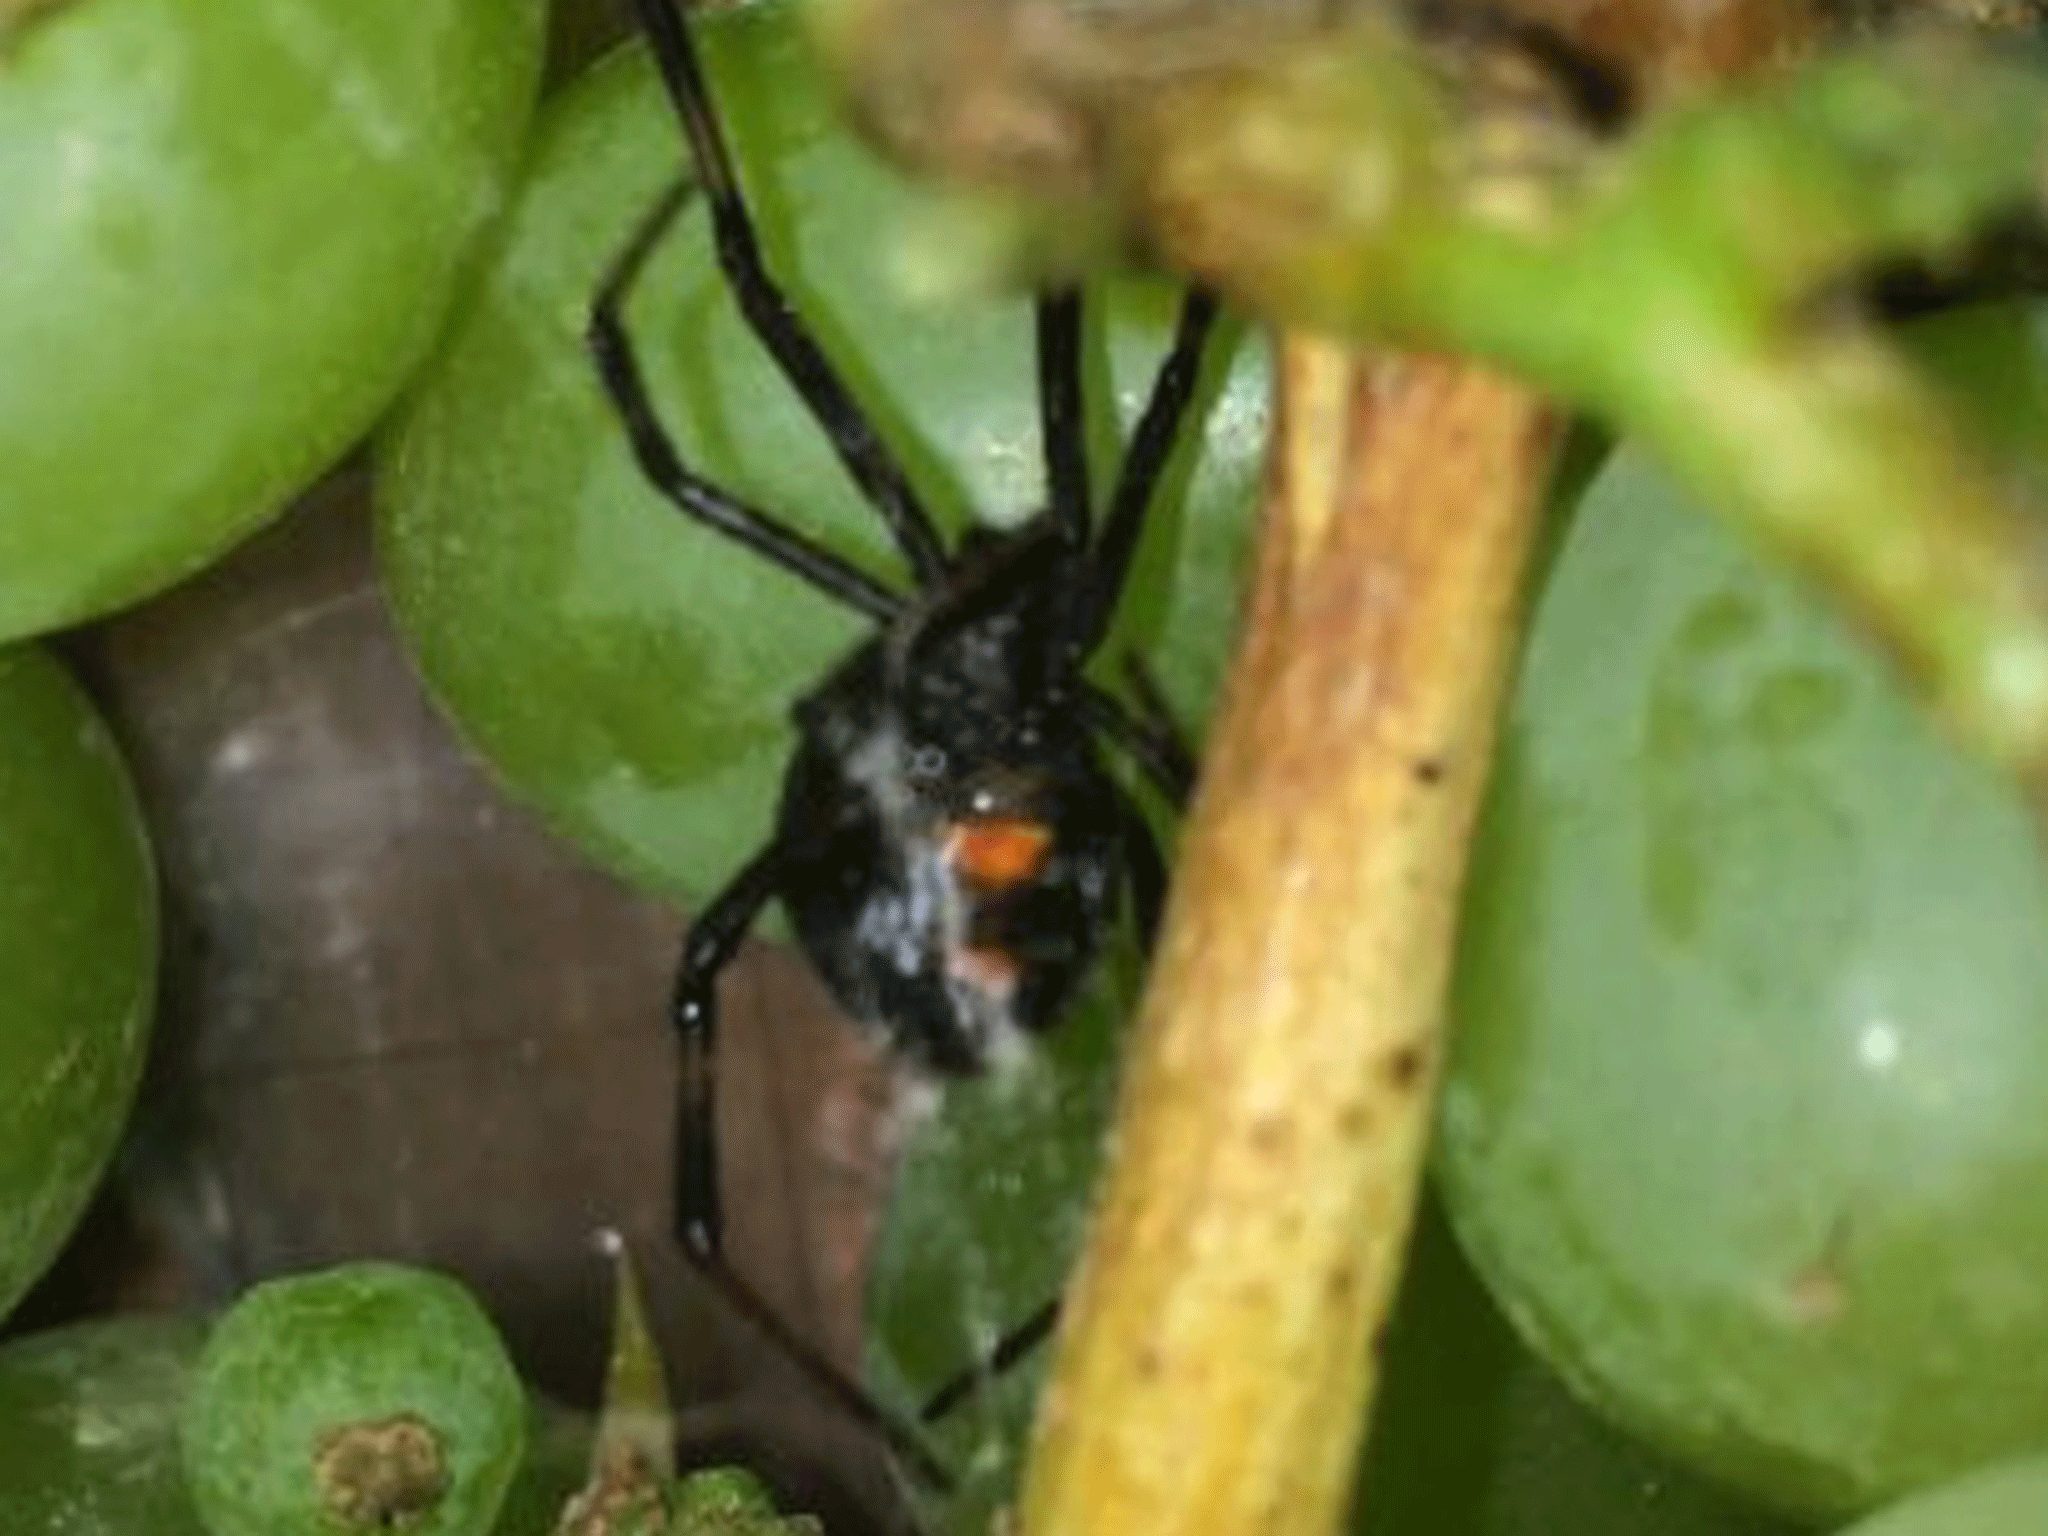 A black widow discovered in a bunch of grapes bought at a supermarket in Leamington Spa